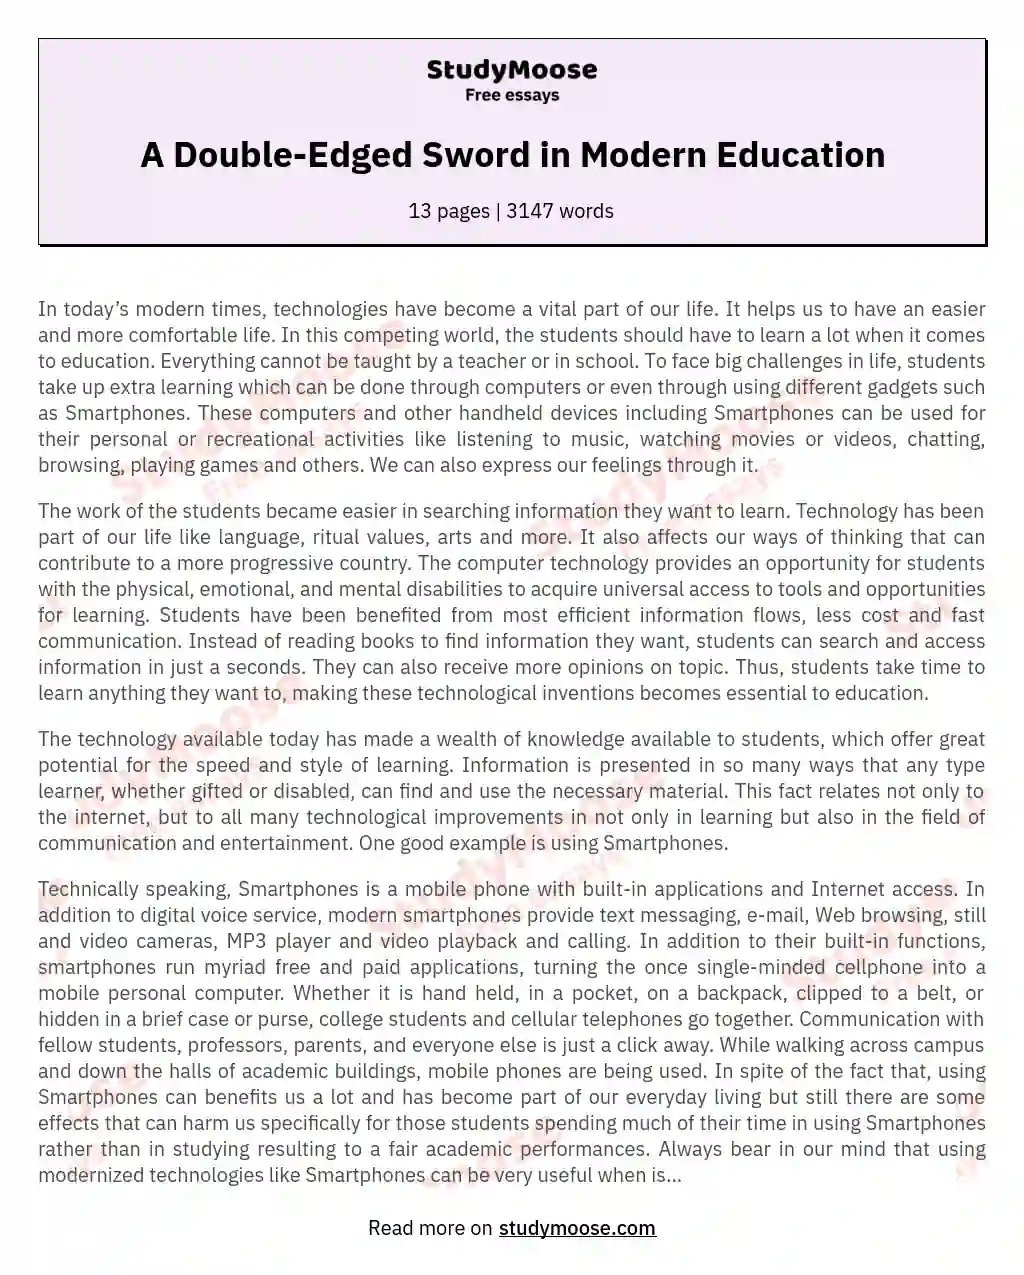 A Double-Edged Sword in Modern Education essay